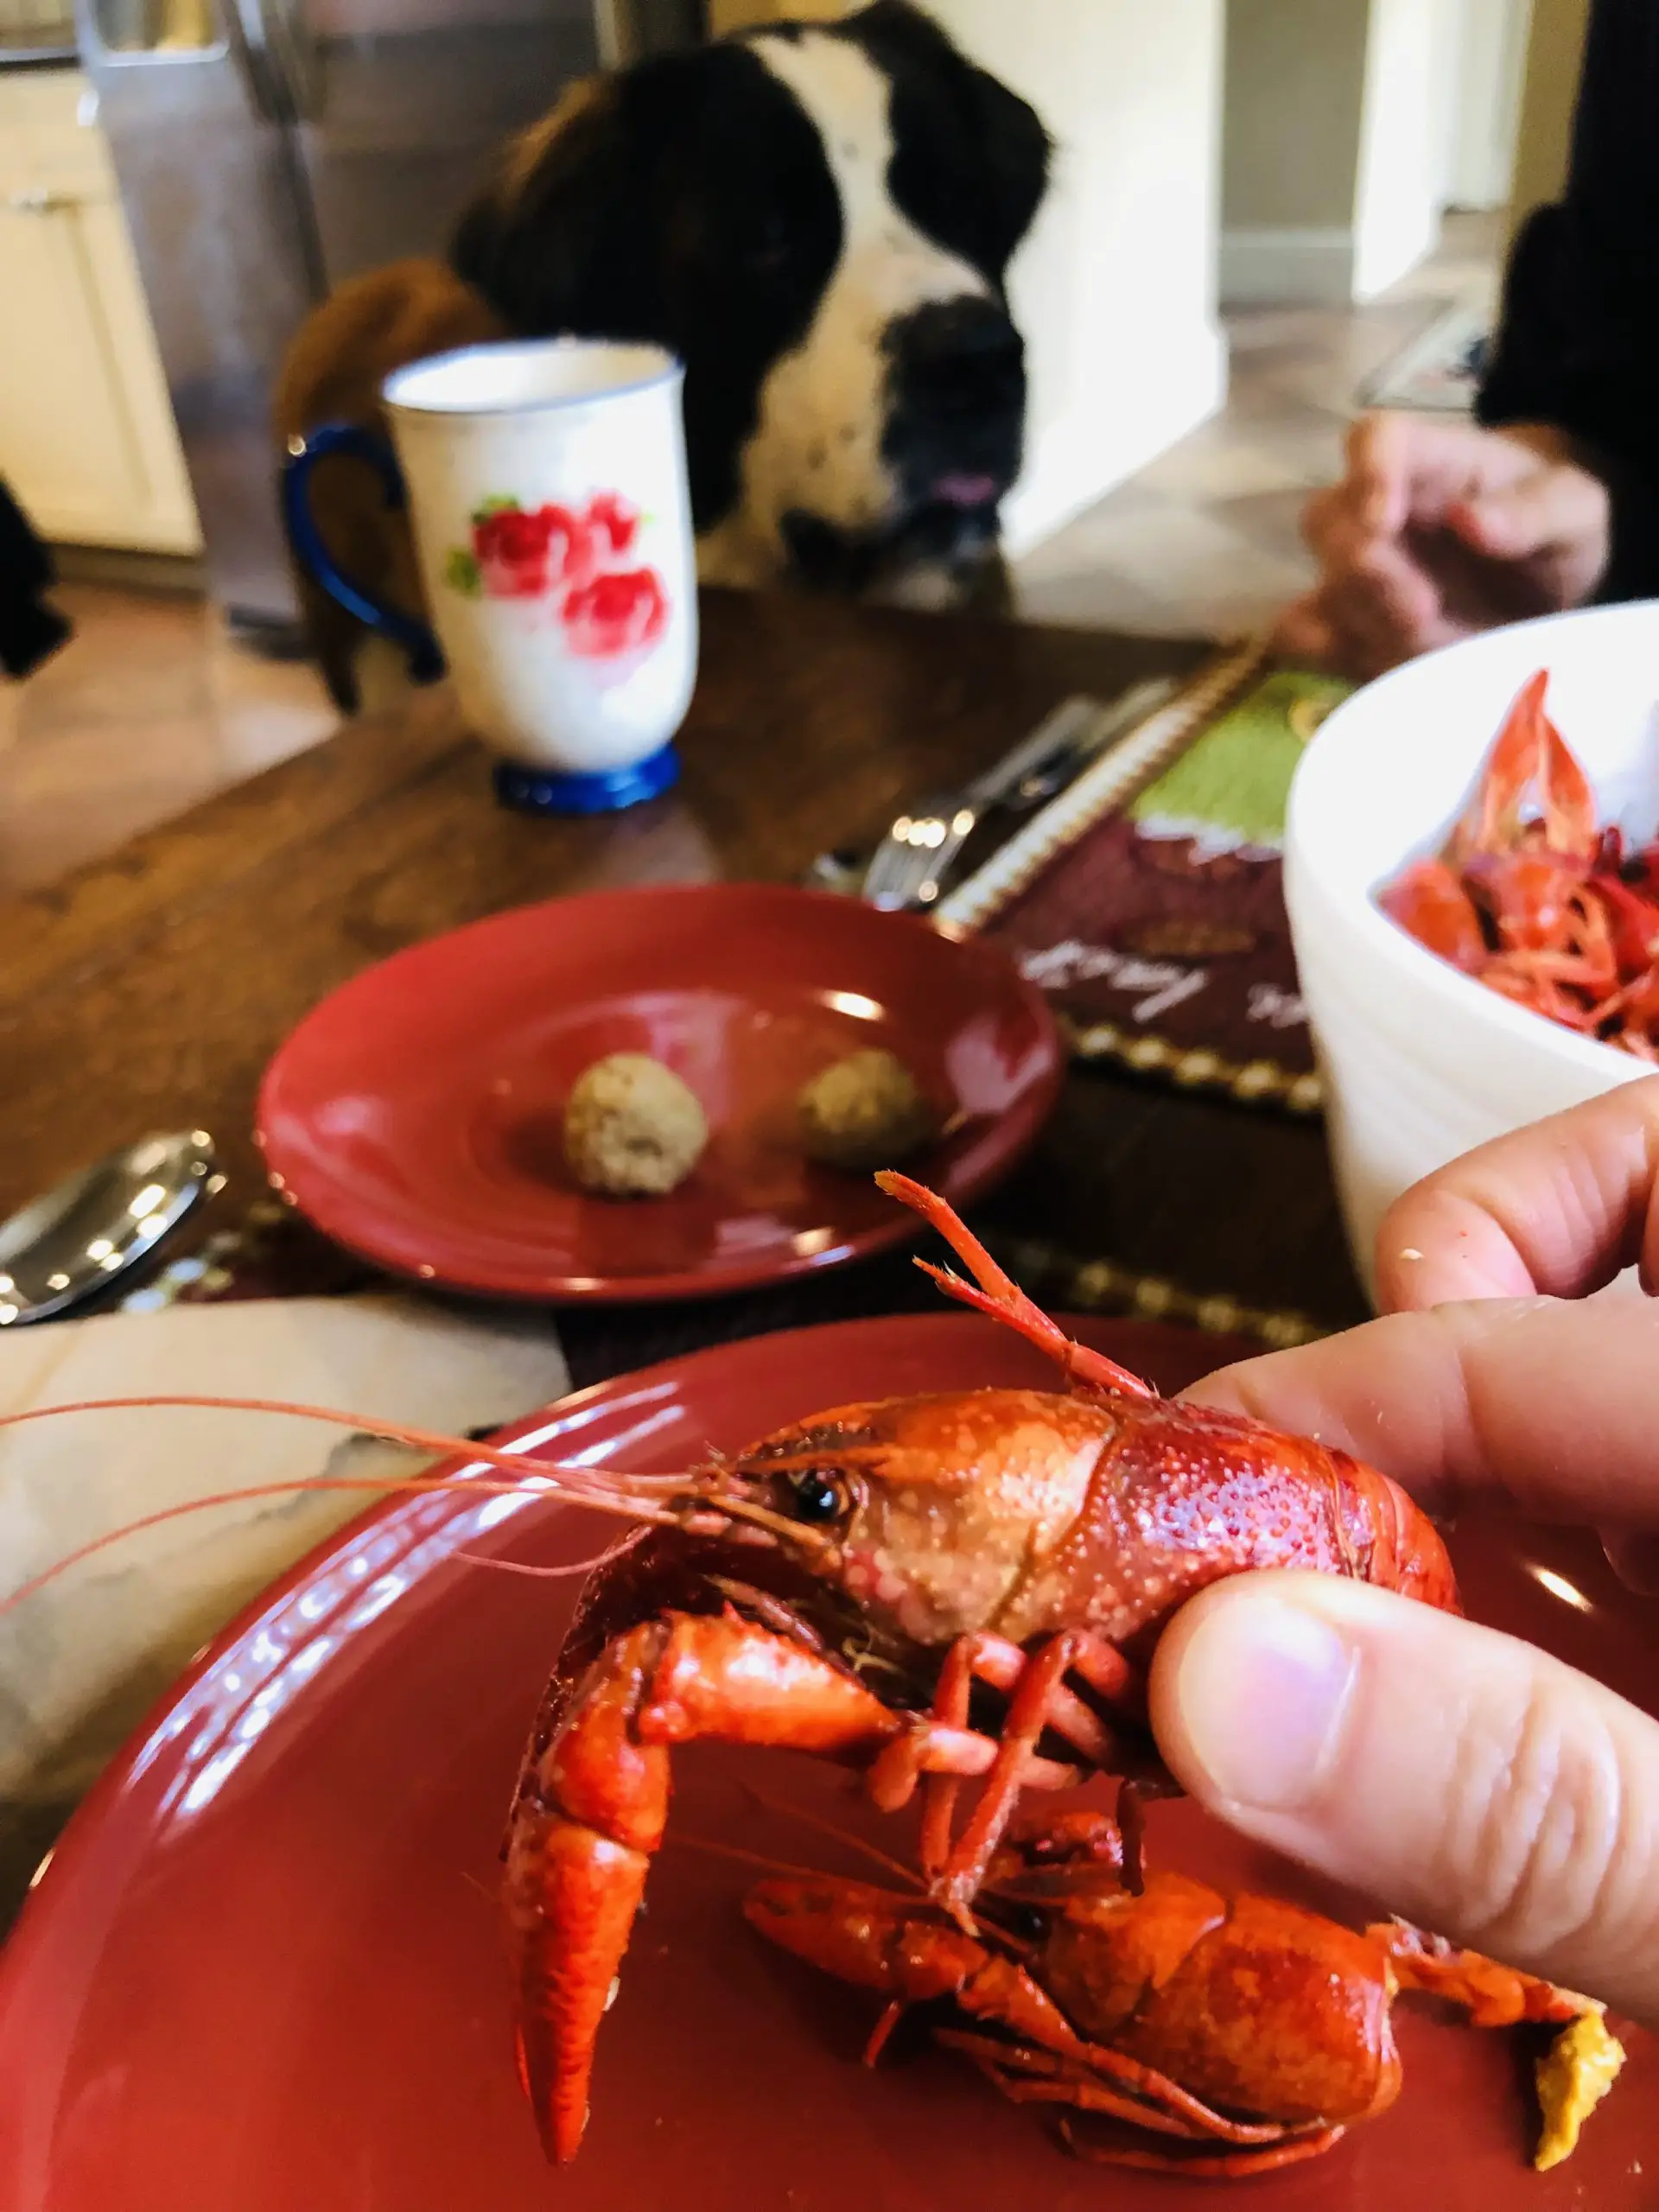 Crawfish being held by a hand, dog in the background with a rose mug, a white bowl filled with crawfish and some boudin balls